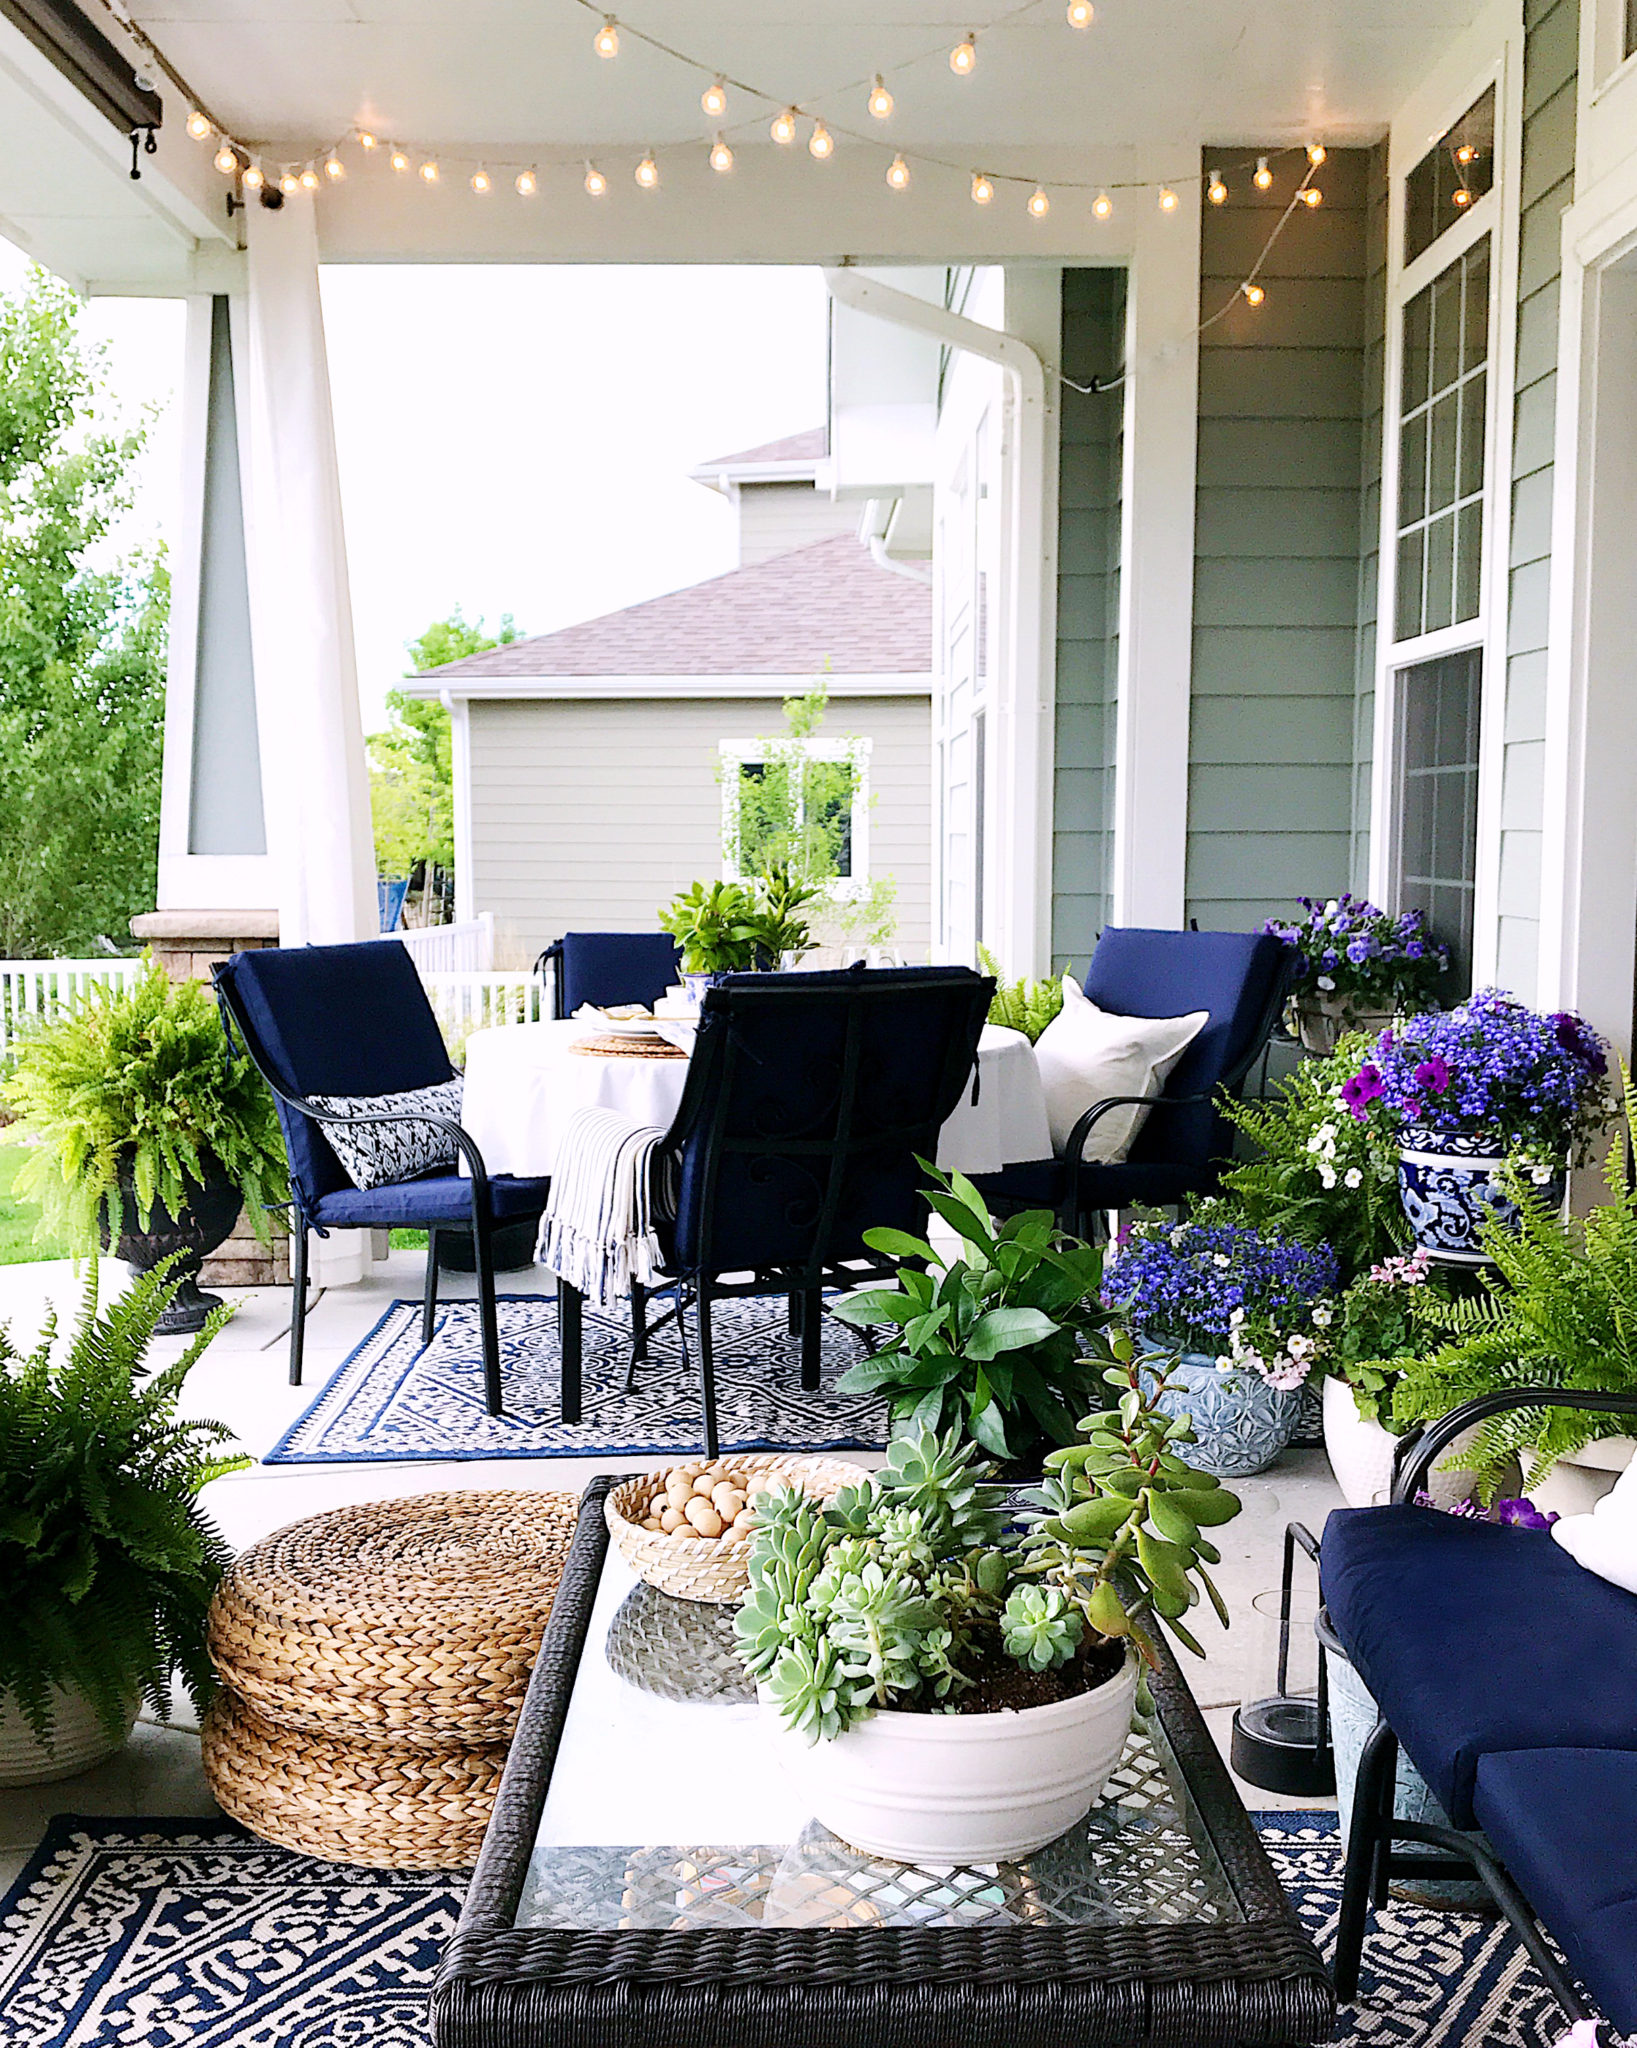 Beautiful furniture and decor ideas for the patio and home - jane at home